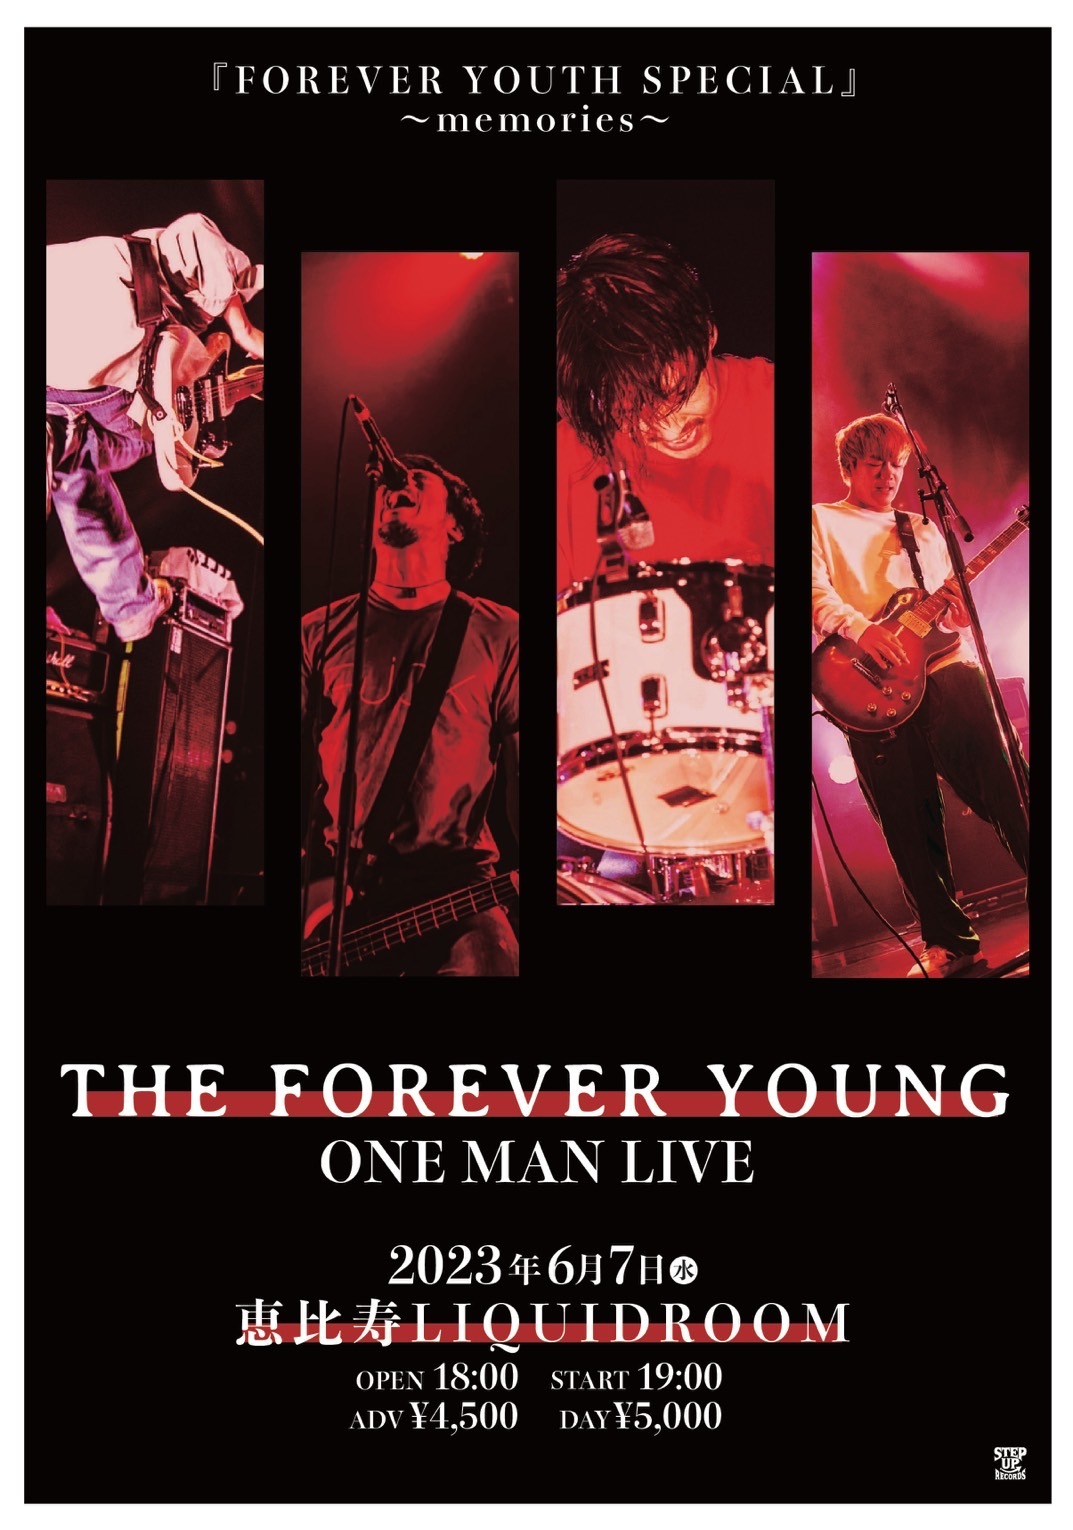 『THE FOREVER YOUNG presents FOREVER YOUTH SPECIAL～memories ～』